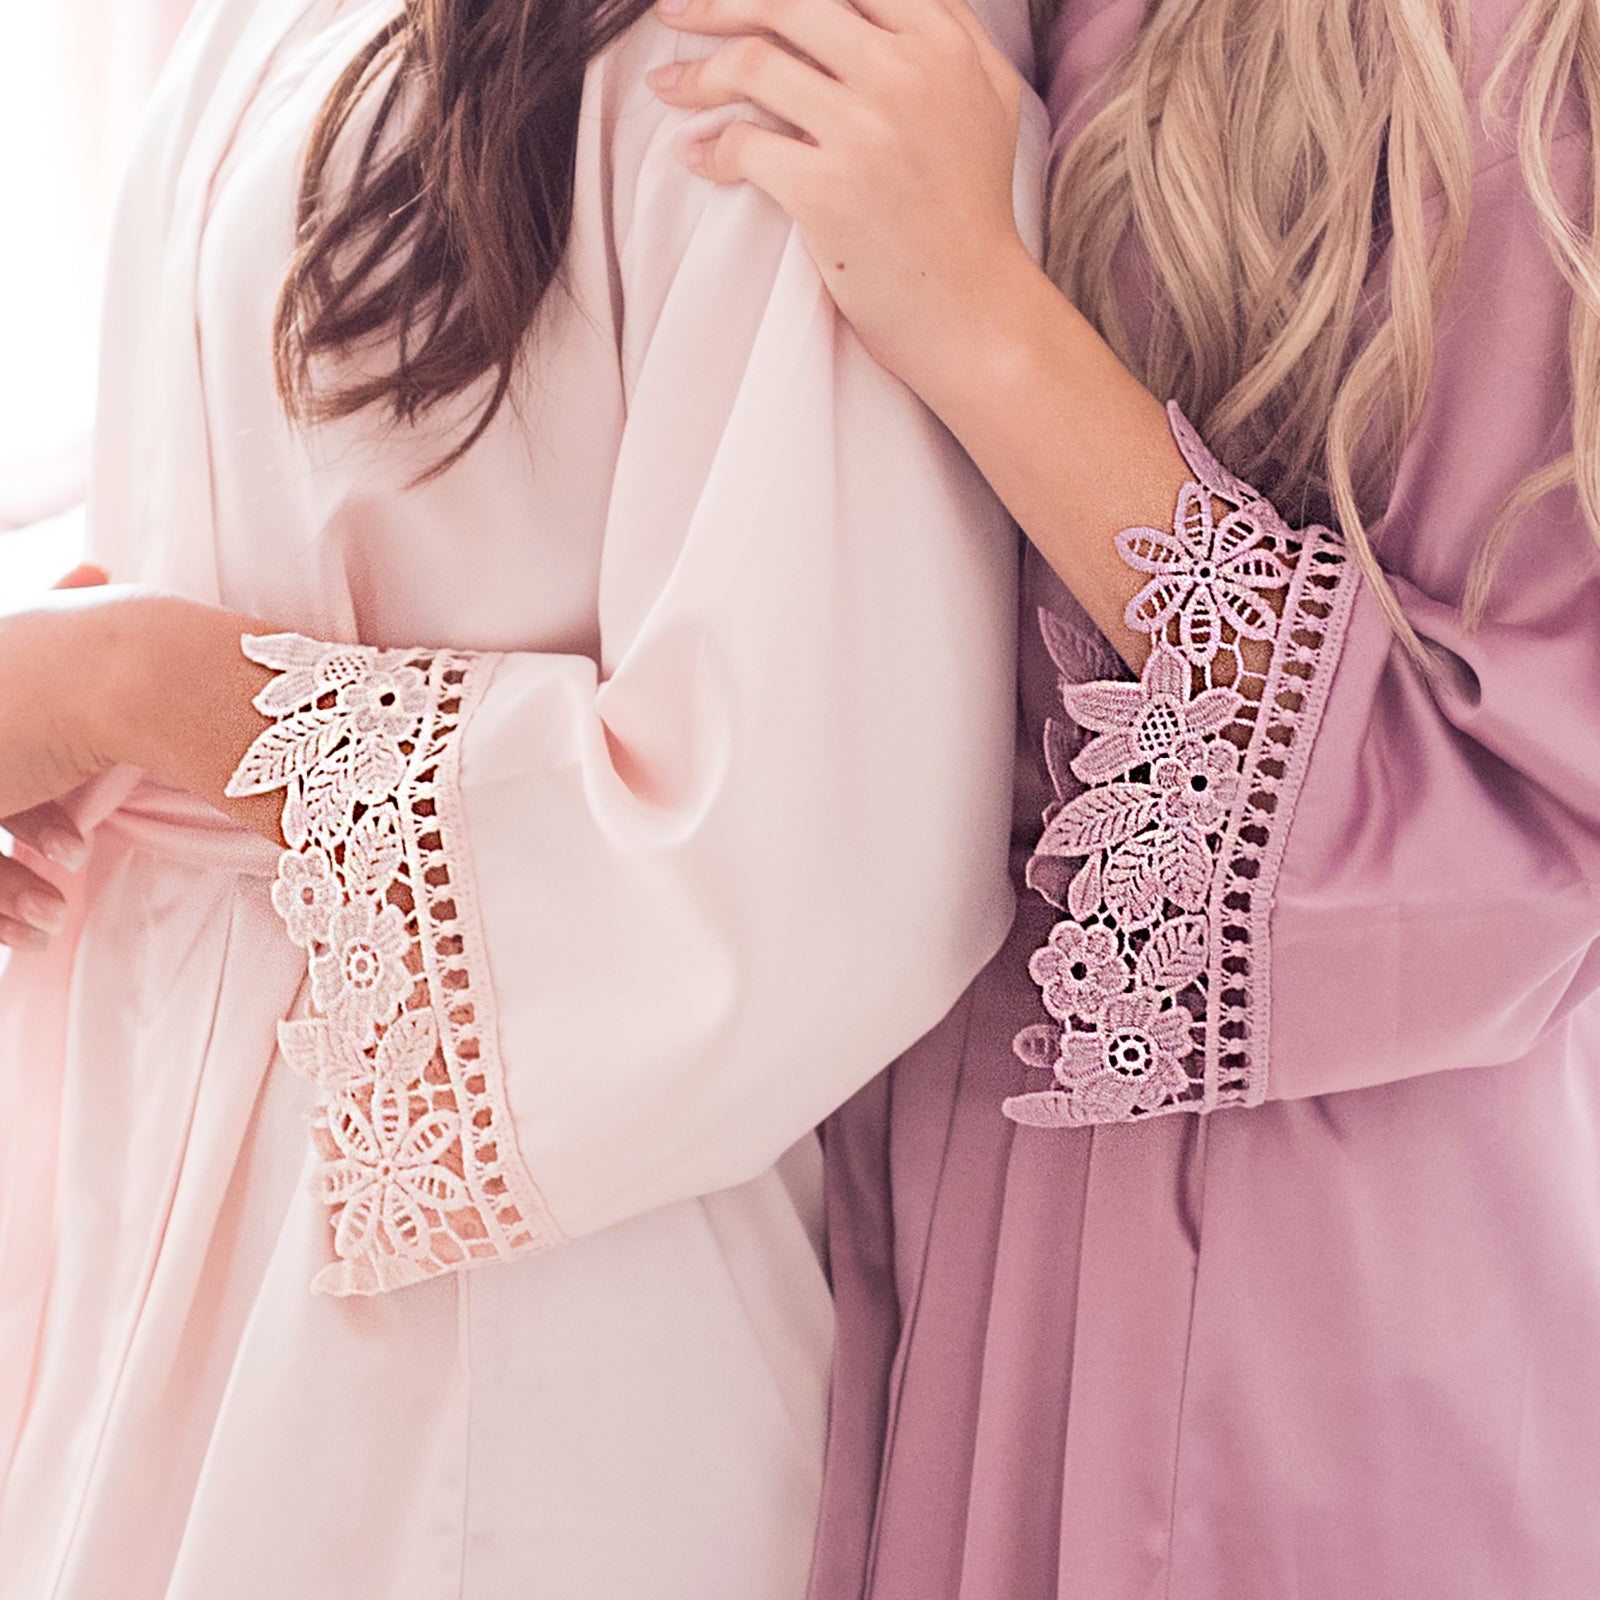 Satin Bridesmaid Robes - Blush and Mauve Satin Bridesmaid Robes with Chunky Lace Trim on the sleeves - Hundred Hearts